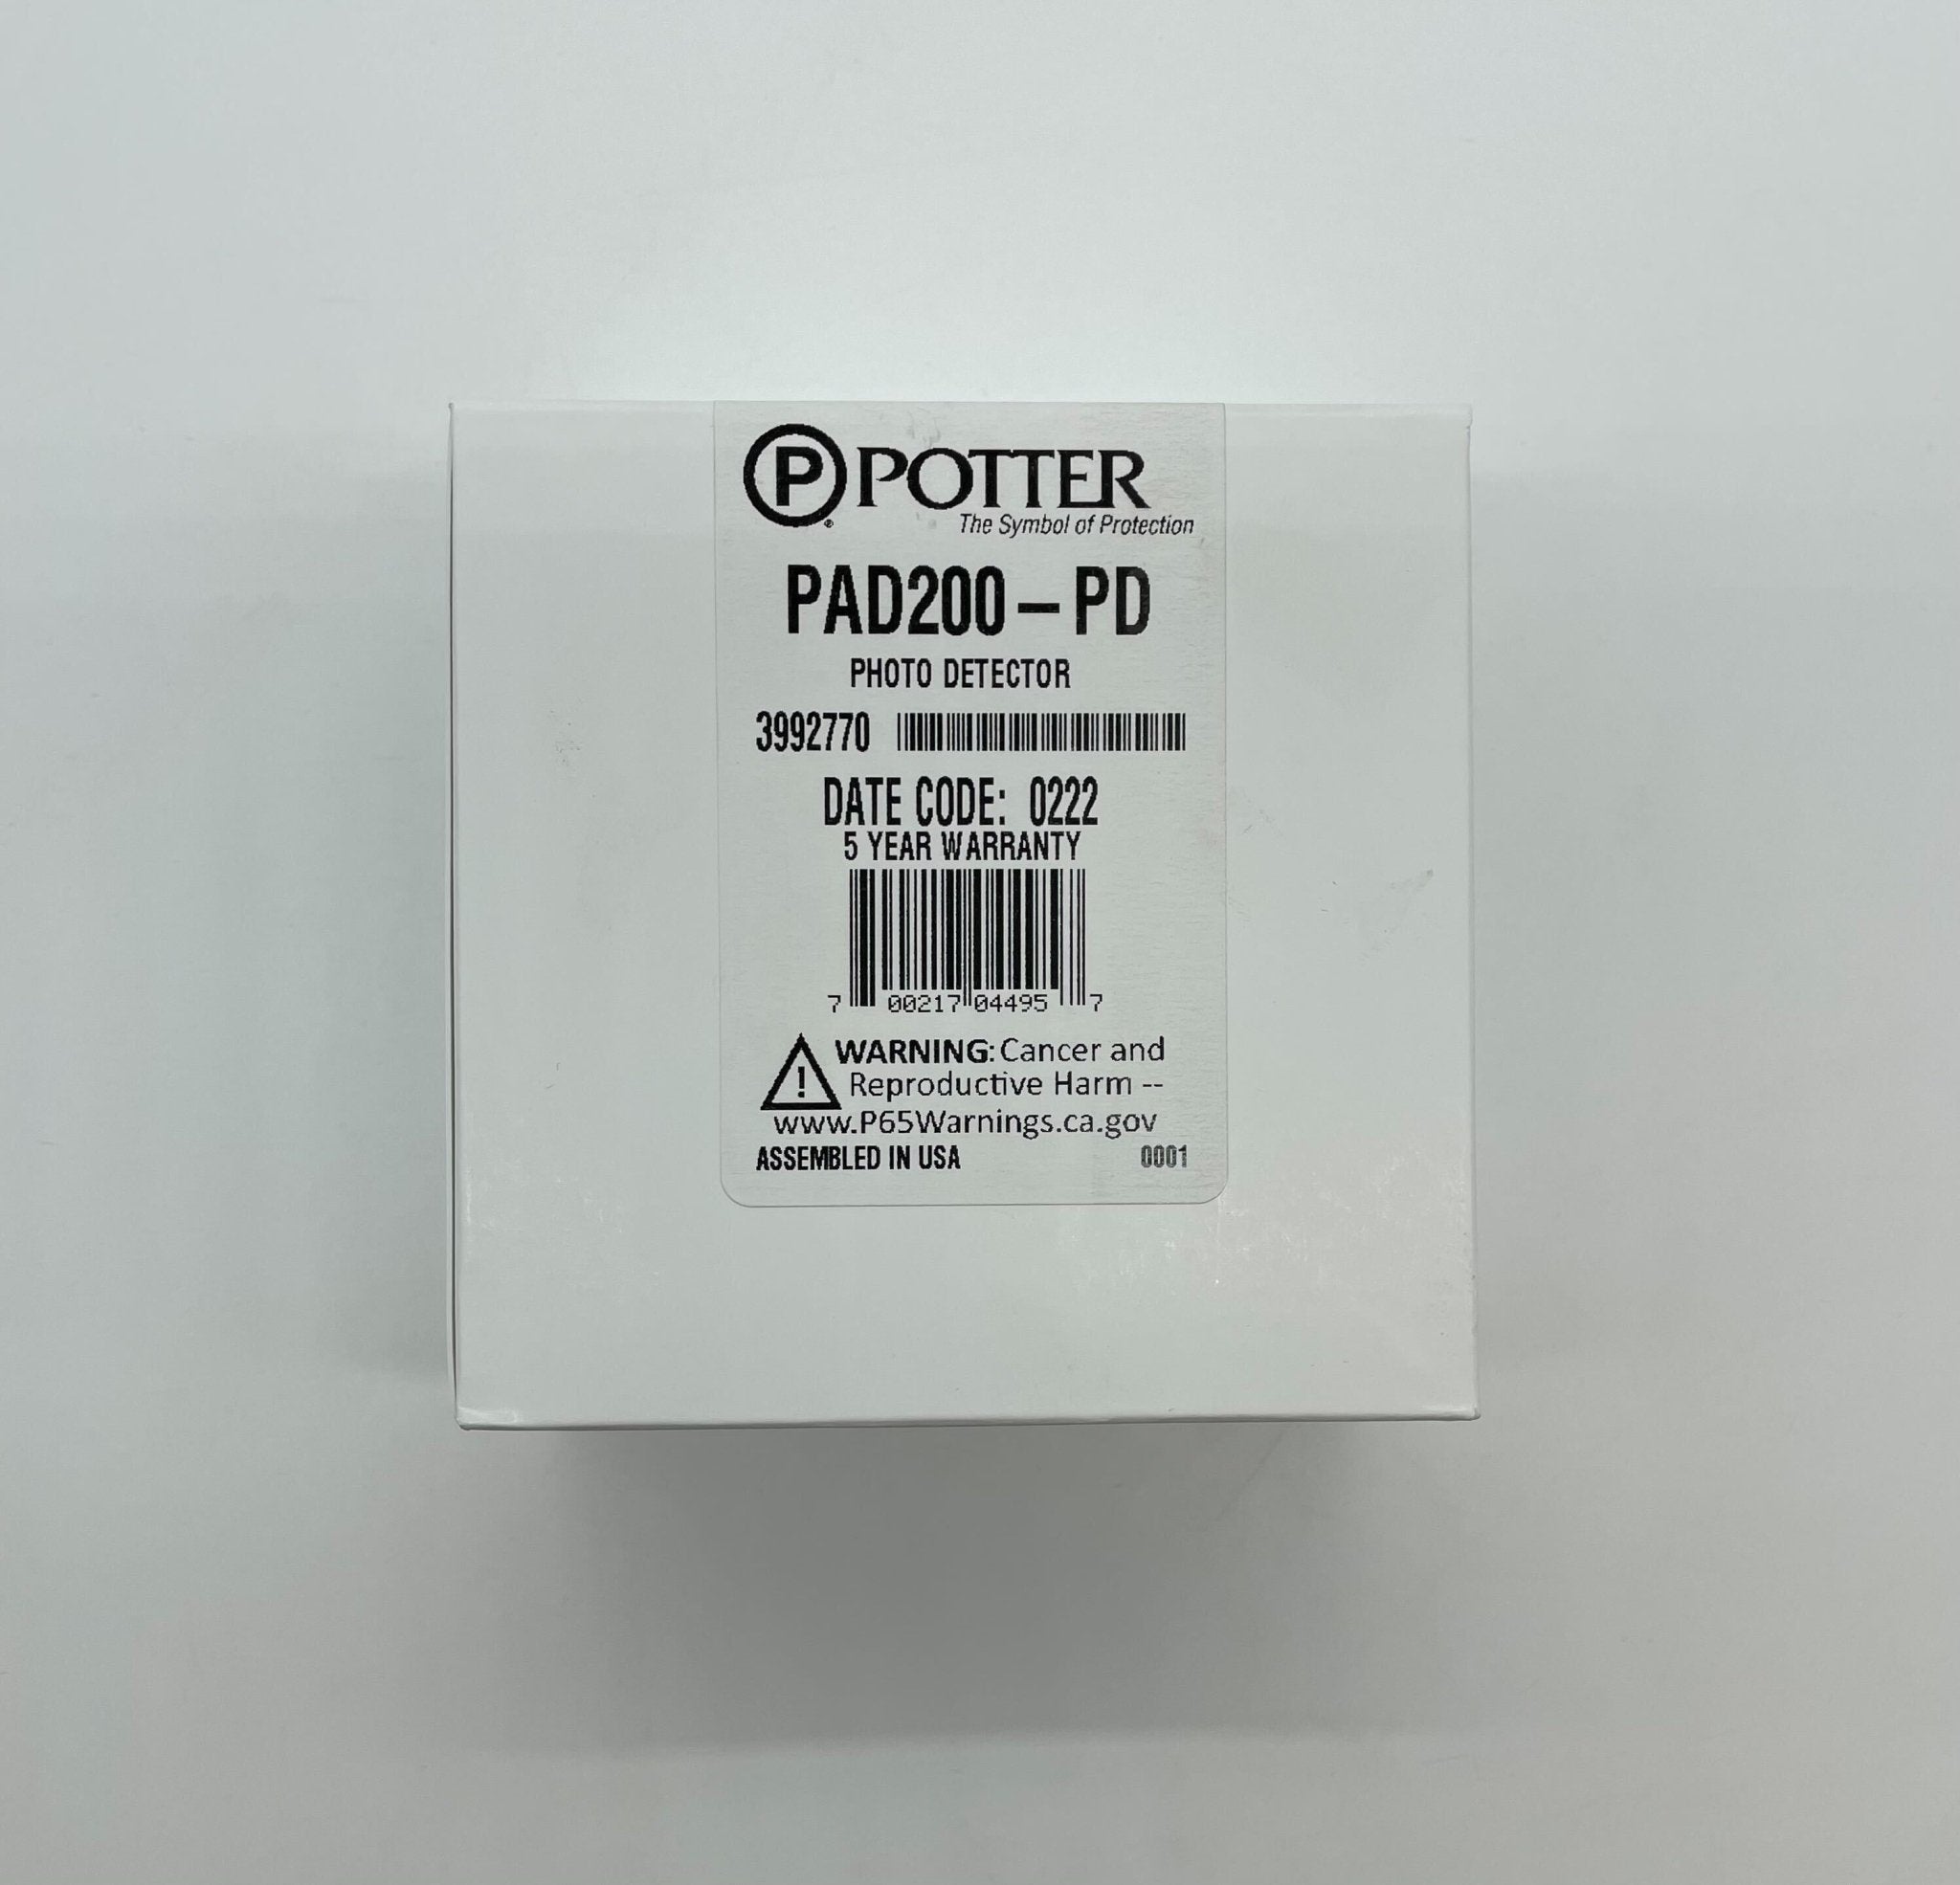 Potter PAD200-PD - The Fire Alarm Supplier